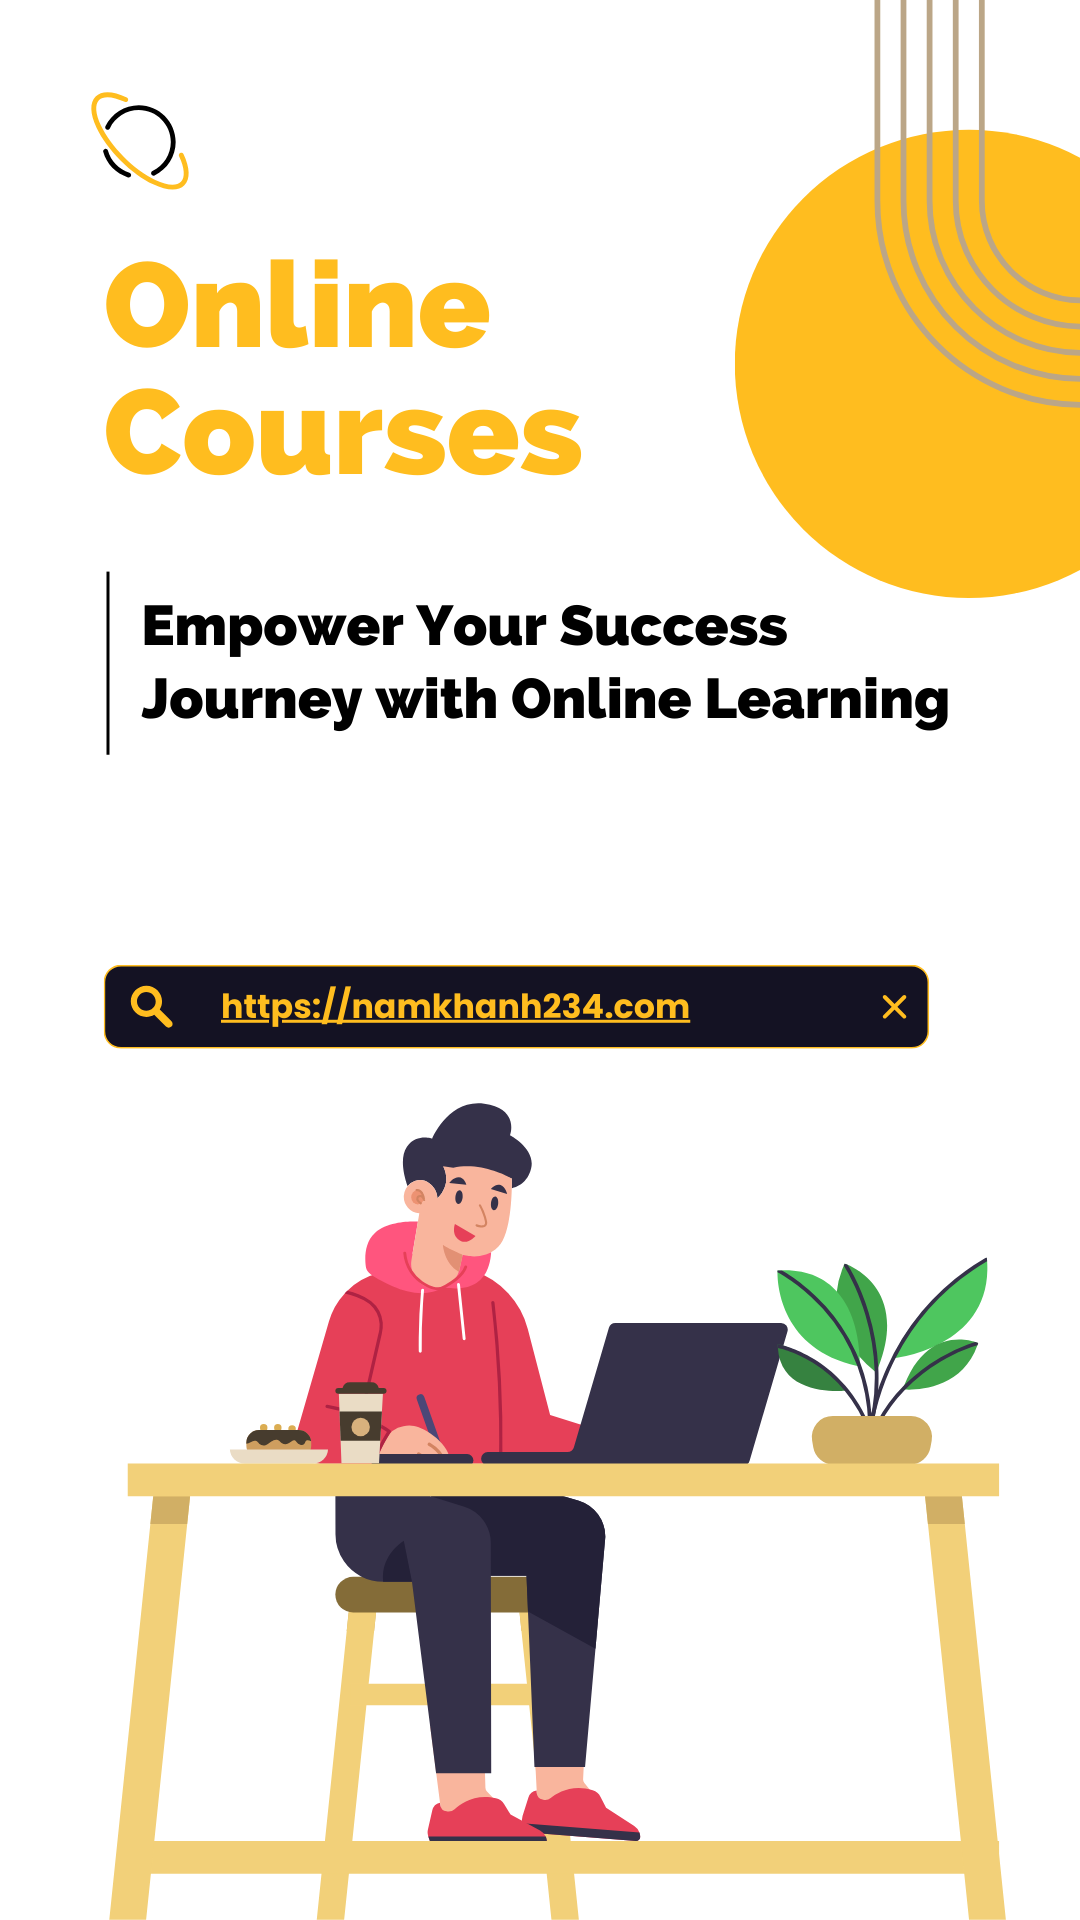 One of the standout features of online courses is their flexibility. They are designed to fit seamlessly into your busy life, allowing you to balance work, family, and personal commitments while pursuing your education. With 24/7 access to course materials and the freedom to set your own study schedule, online learning empowers you to learn at your own pace and on your terms.